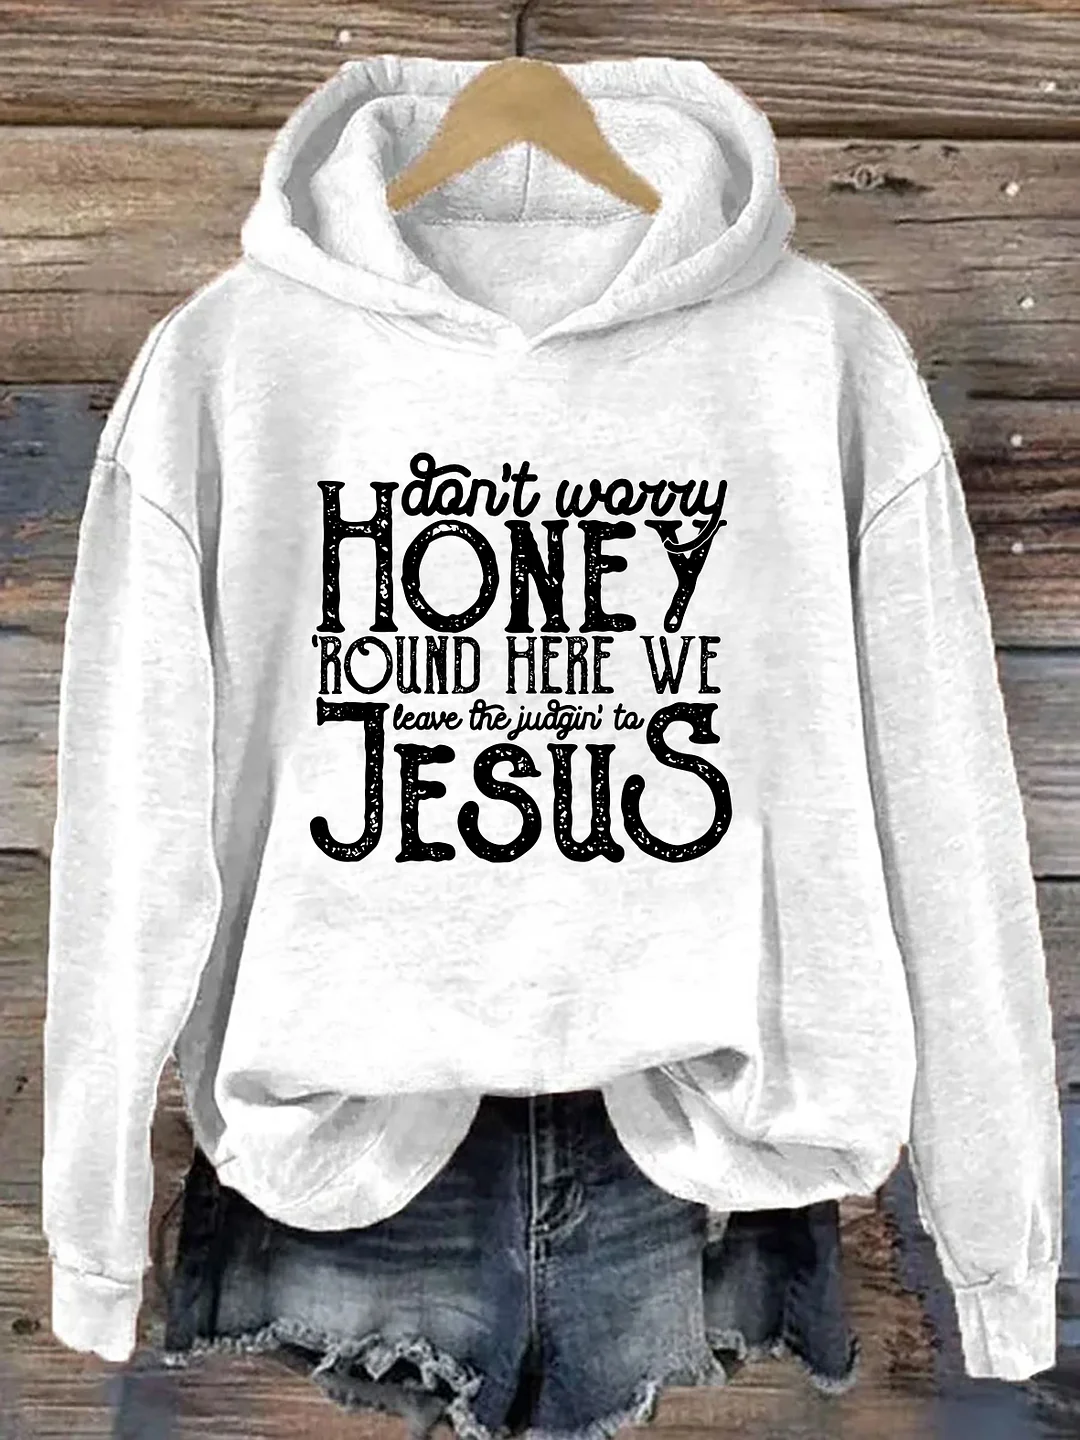 Don't Worry Honey Round Here We Leave The Judgin' To Jesus Hoodie